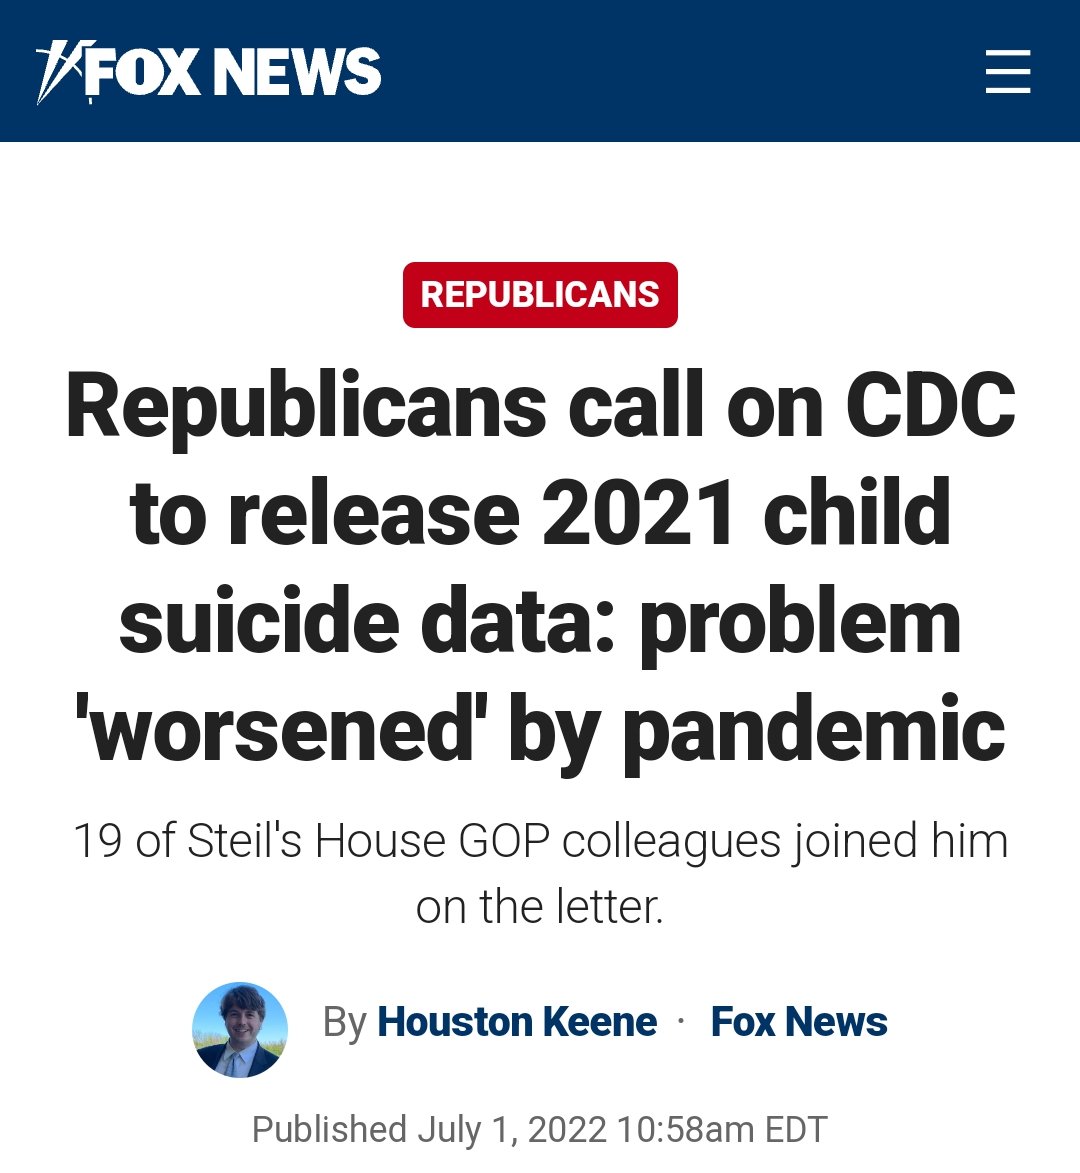 @JonathanFahey @NancyLapid - a hot story that pretty much every MSM prediction got wrong. Child Suicide went down during the pandemic emergency. Dr. Black is a literal suicidologist, and his DMs are open. Fox News made fools of themselves on it.